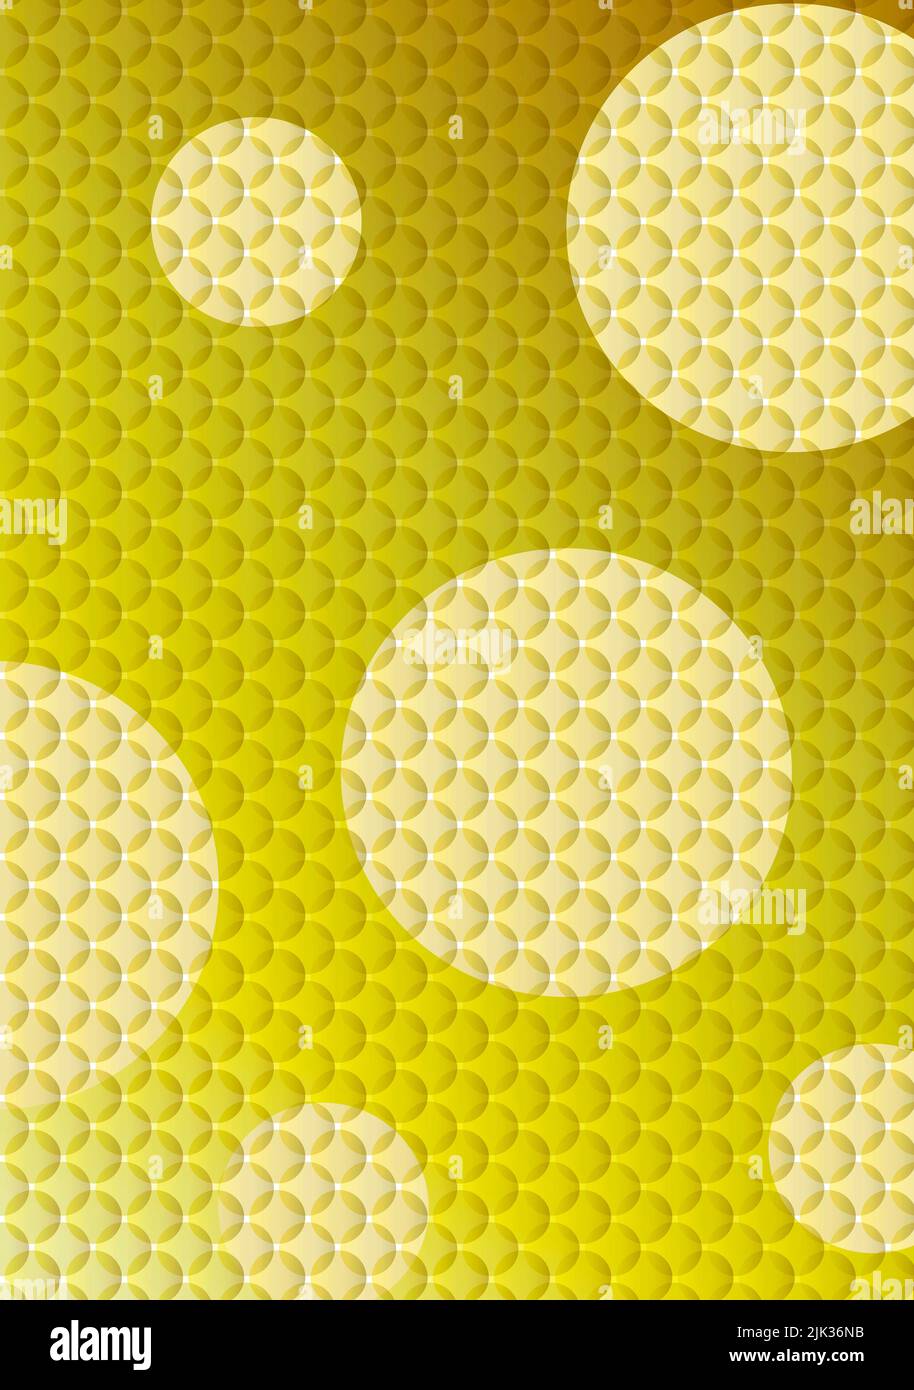 ImprimirAbstract Geometry pattern yellow background for design - stock illustration Stock Photo